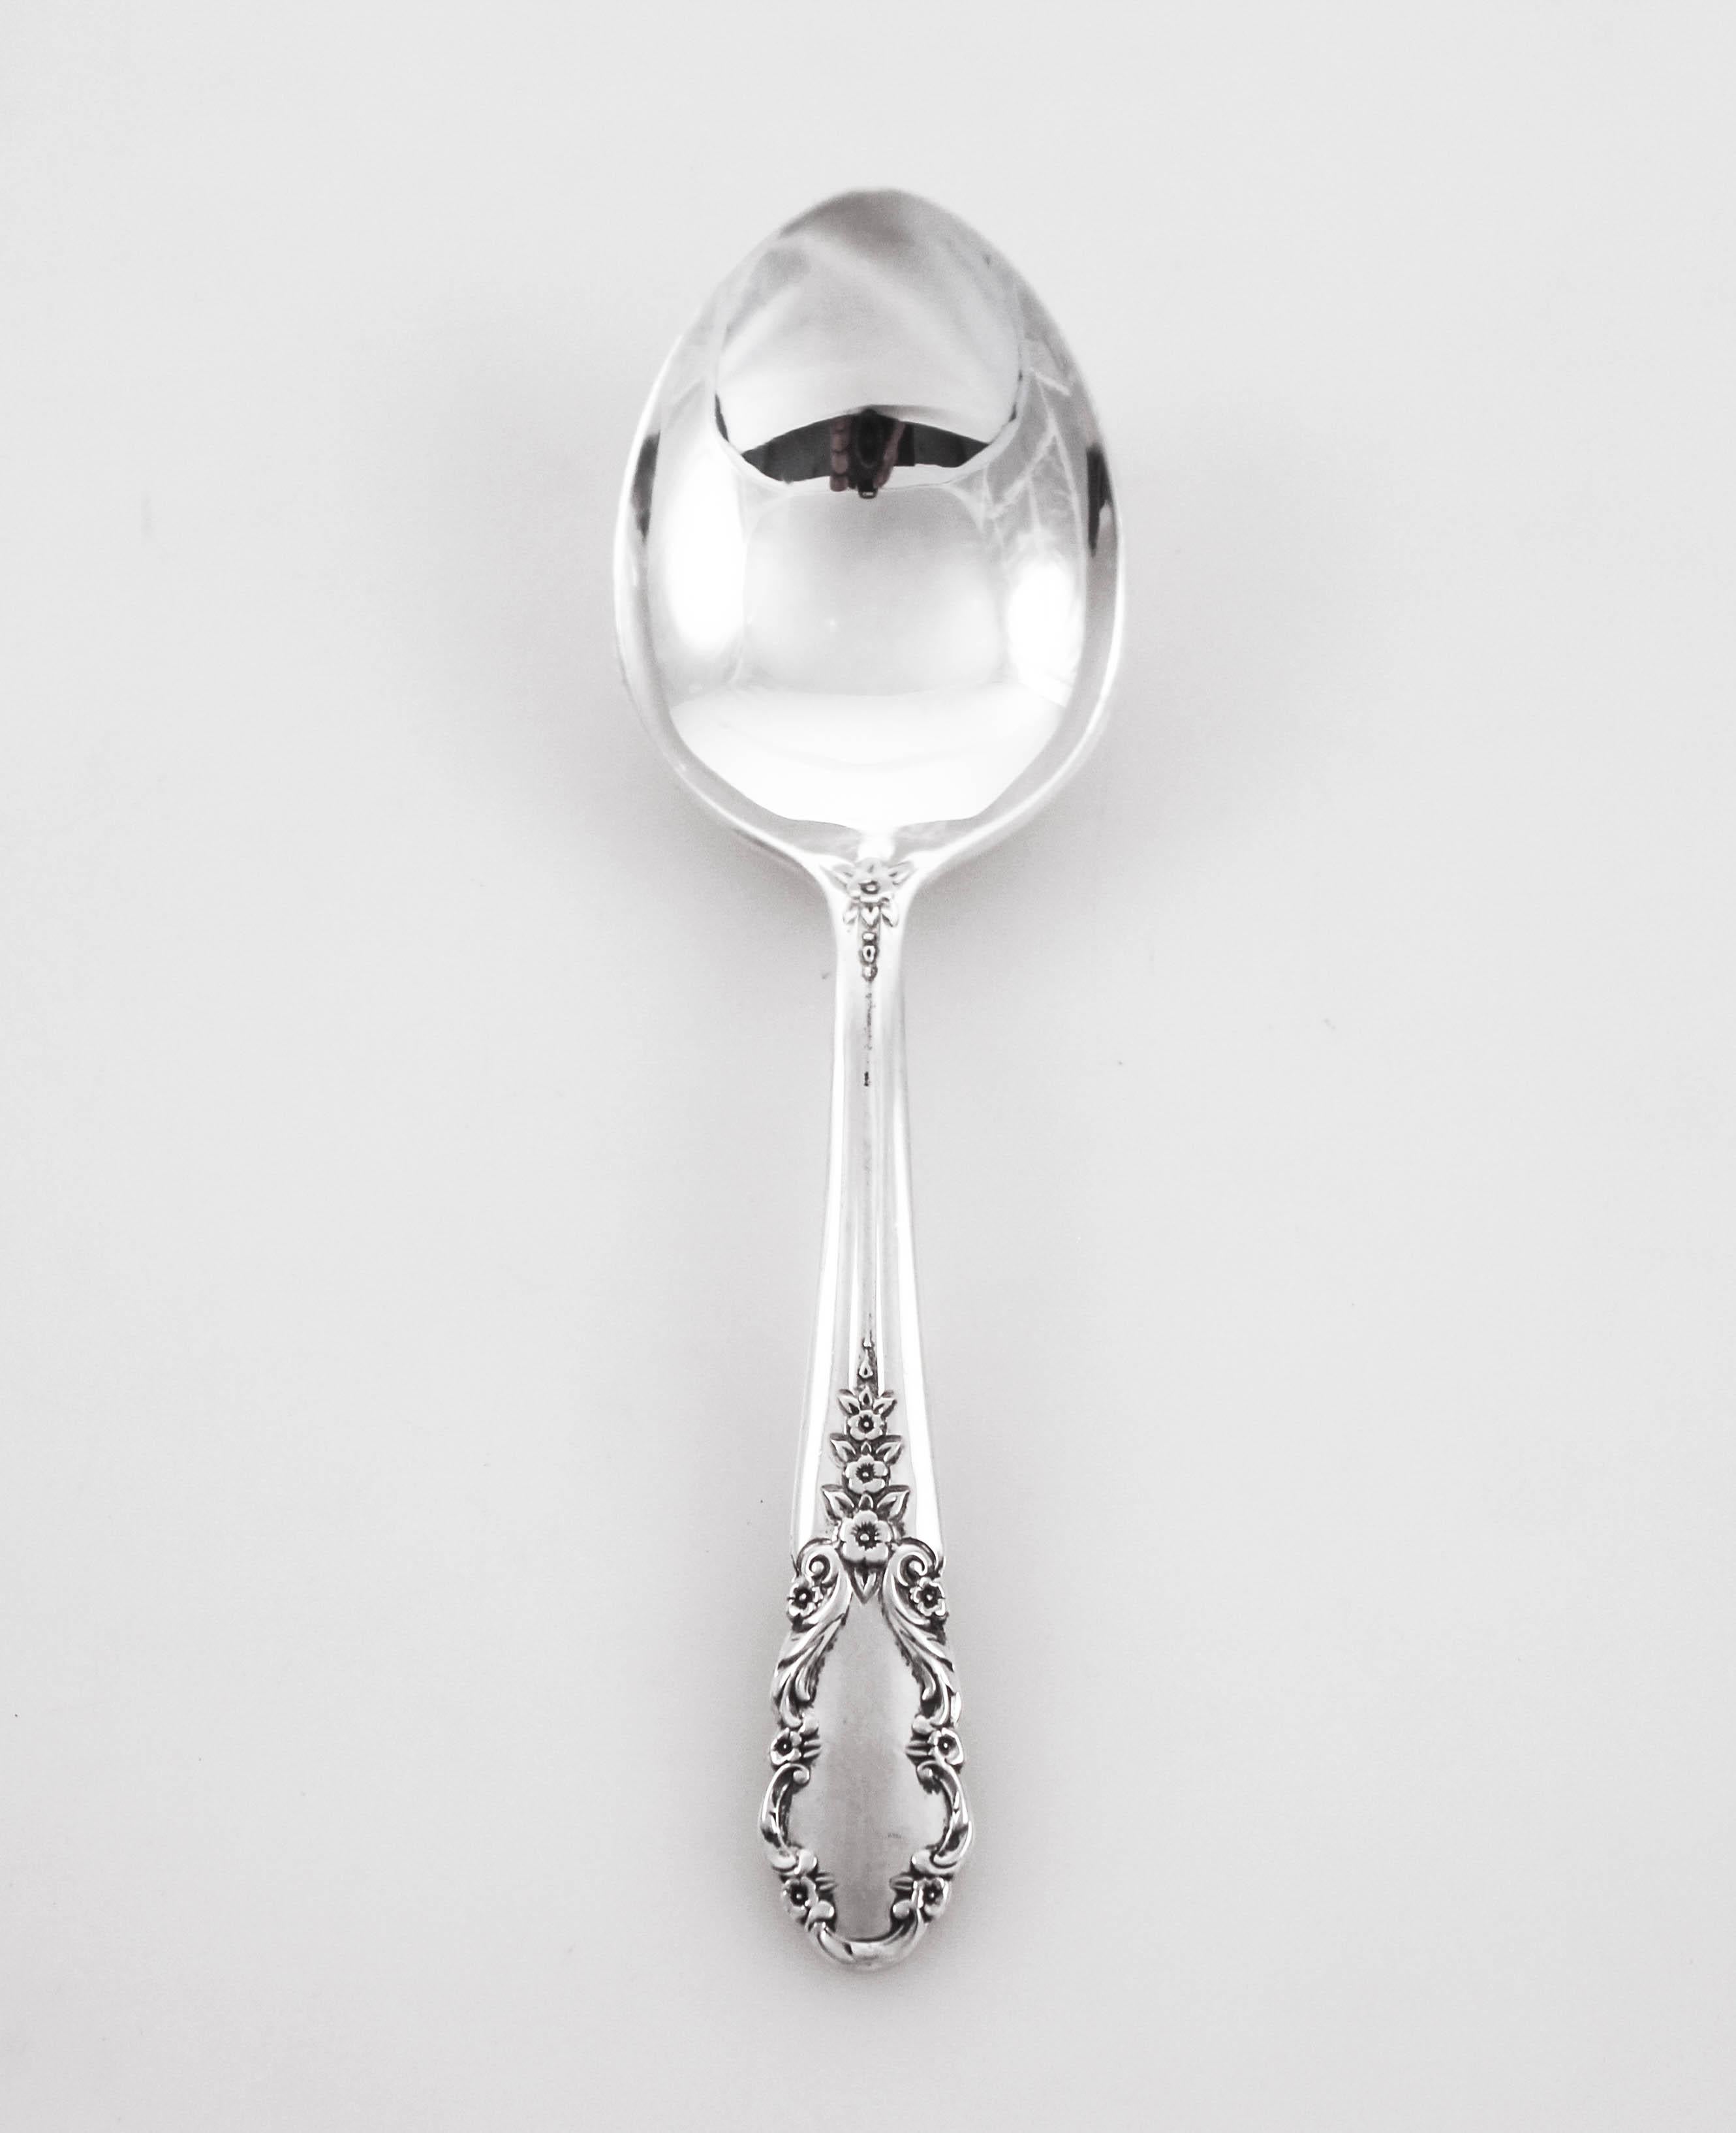 We are happy to offer this sterling silver baby fork and spoon set by International Silversmiths in the “Bridal Veil” pattern. It has a scalloped tip with flowers around the edge. No monogram or monogram removal. A great gift for the new baby